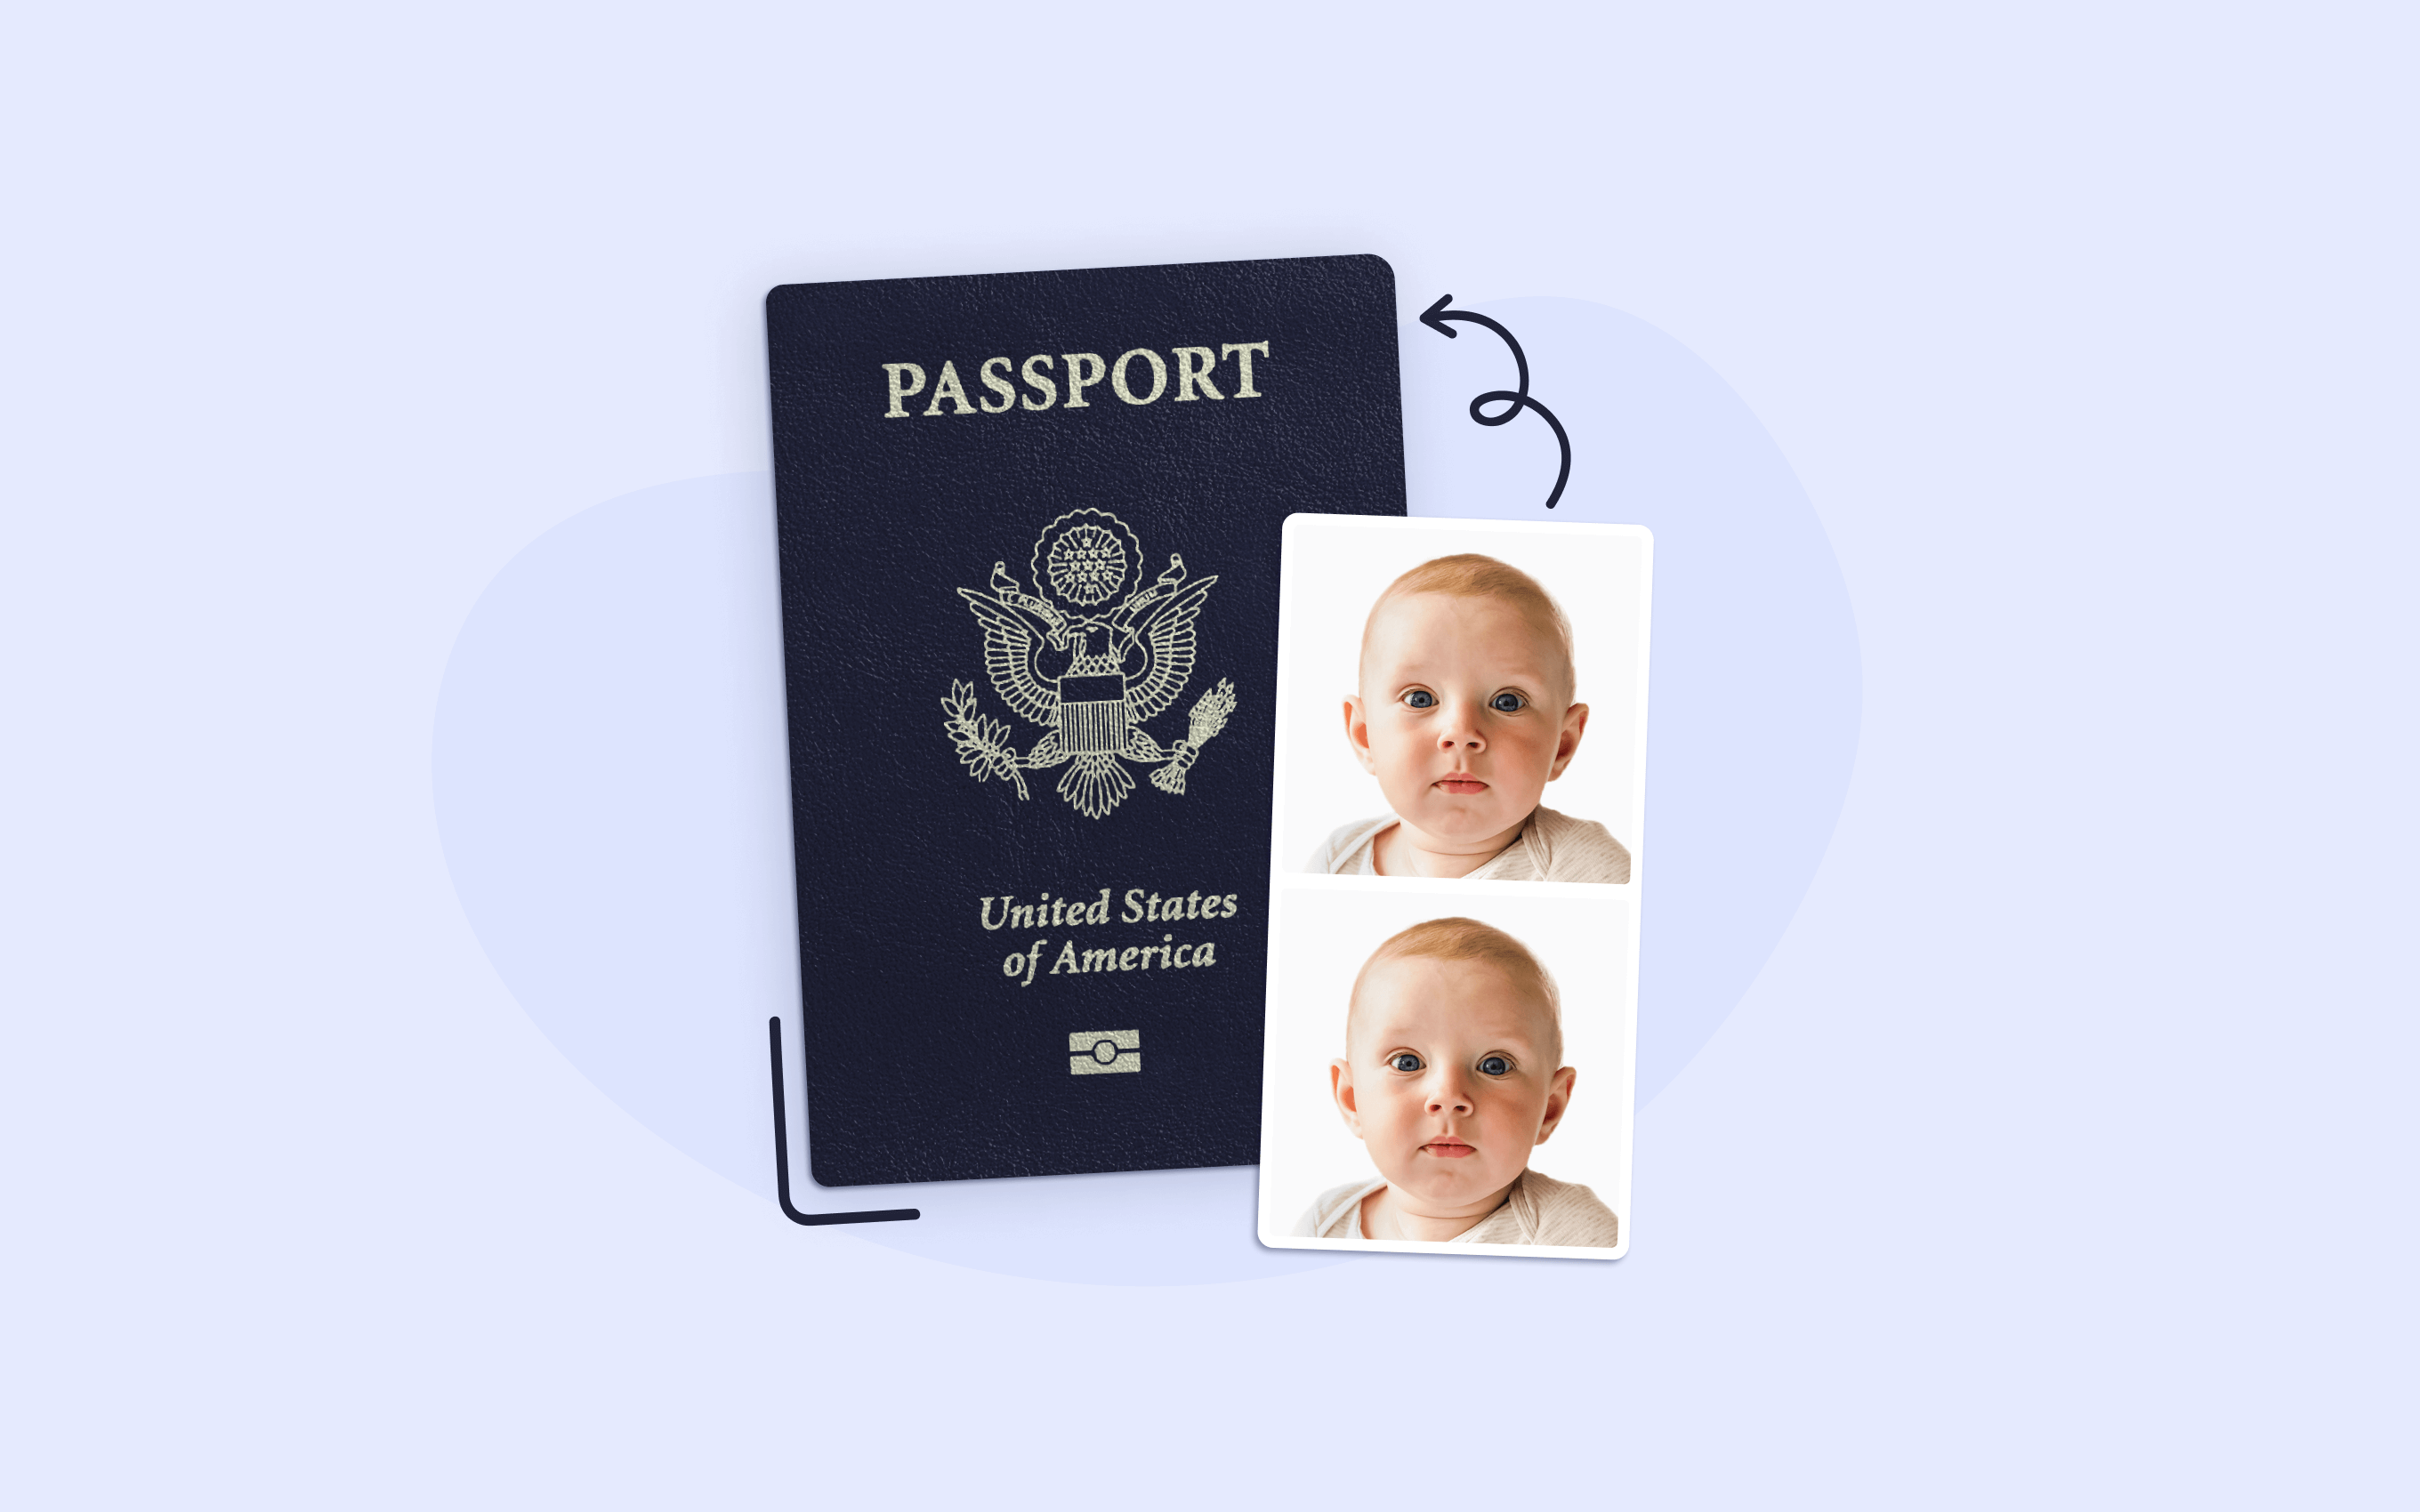 Steps explained to get a child passport.